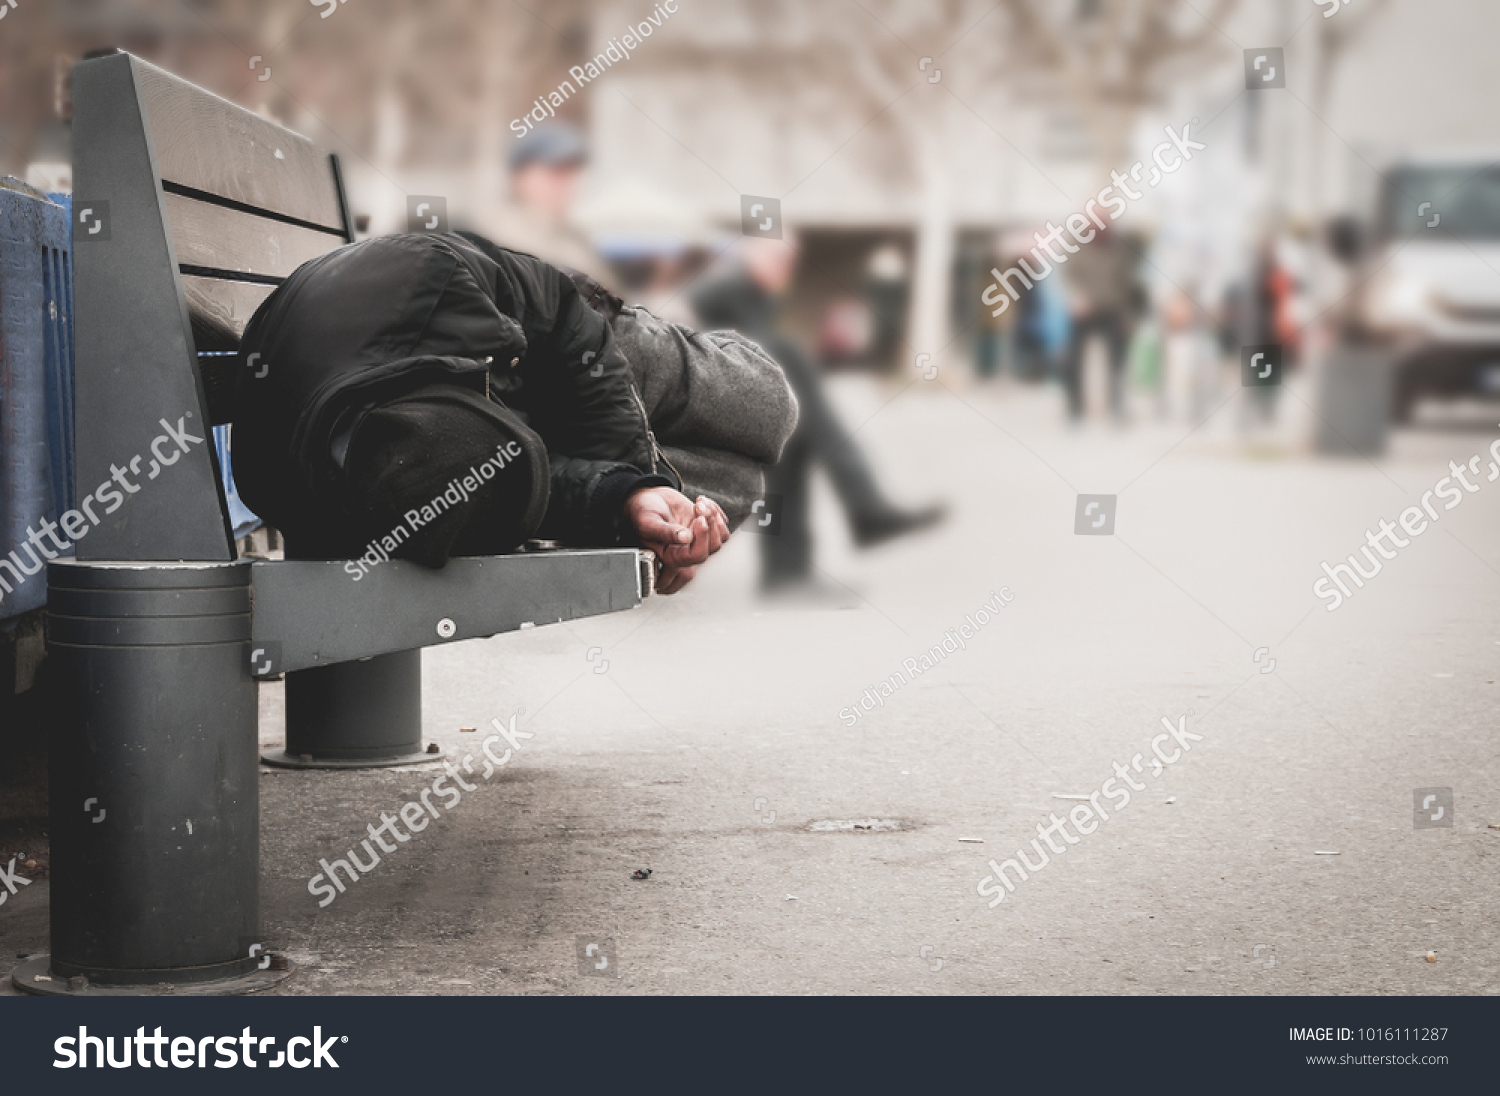 Poor tired depressed hungry homeless man or refugee sleeping on the wooden bench on the urban street in the city, social documentary concept #1016111287